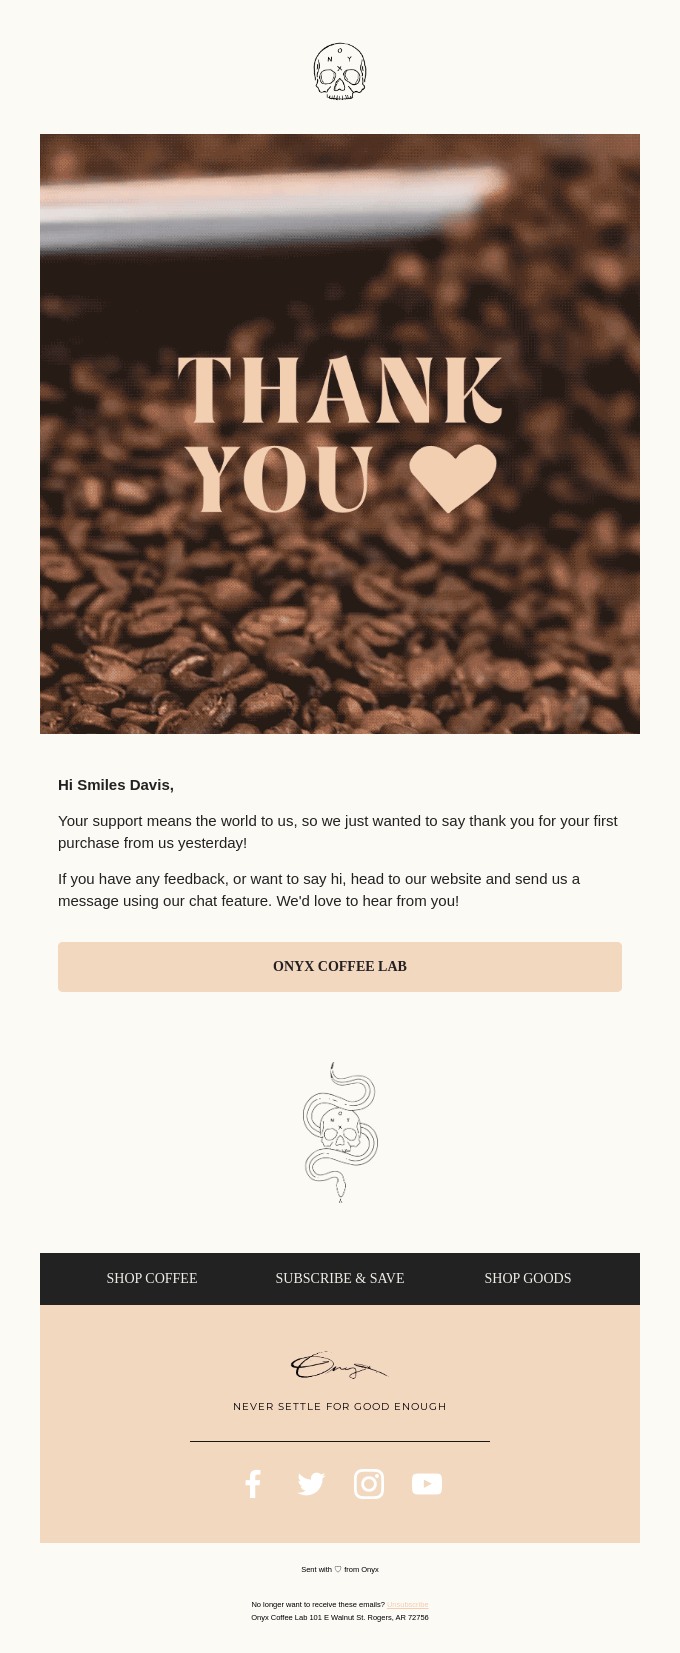 Thank-you email from Onyx Coffee Lab that expresses gratitude for the first purchase and invites customers to use the chat feature on the website